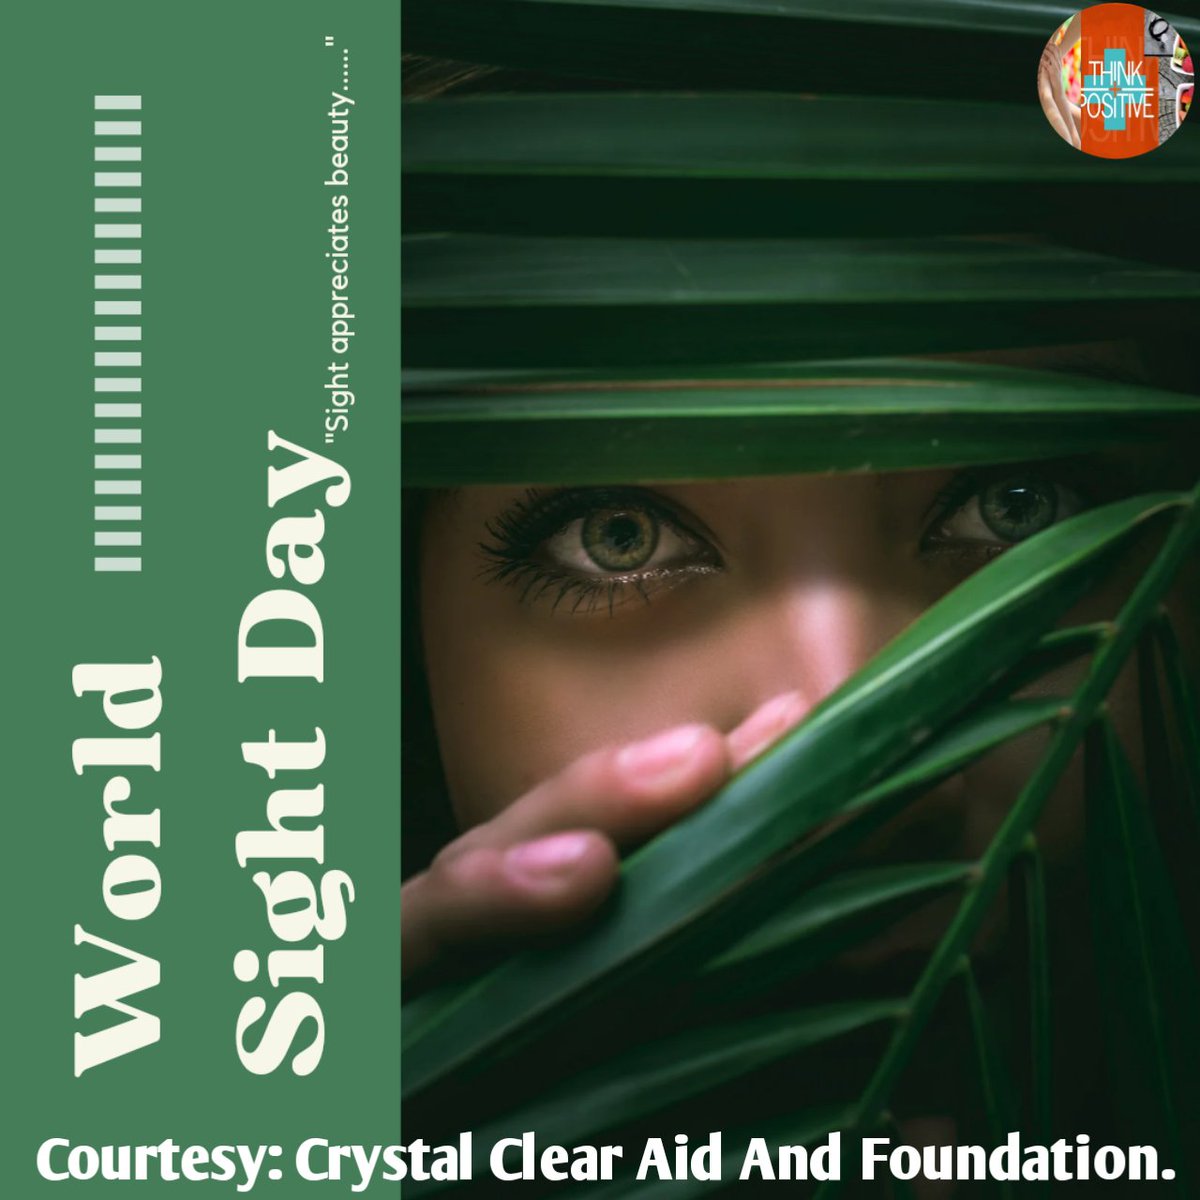 This Day is observed annually on the fourteenth day of October to raise awareness about #blindness,#visionimpairment,to promote #eyehealth and easy access to #eyecareservices, particularly in low-income countries where many people lack access to basic #eyecare. 
#worldsightday